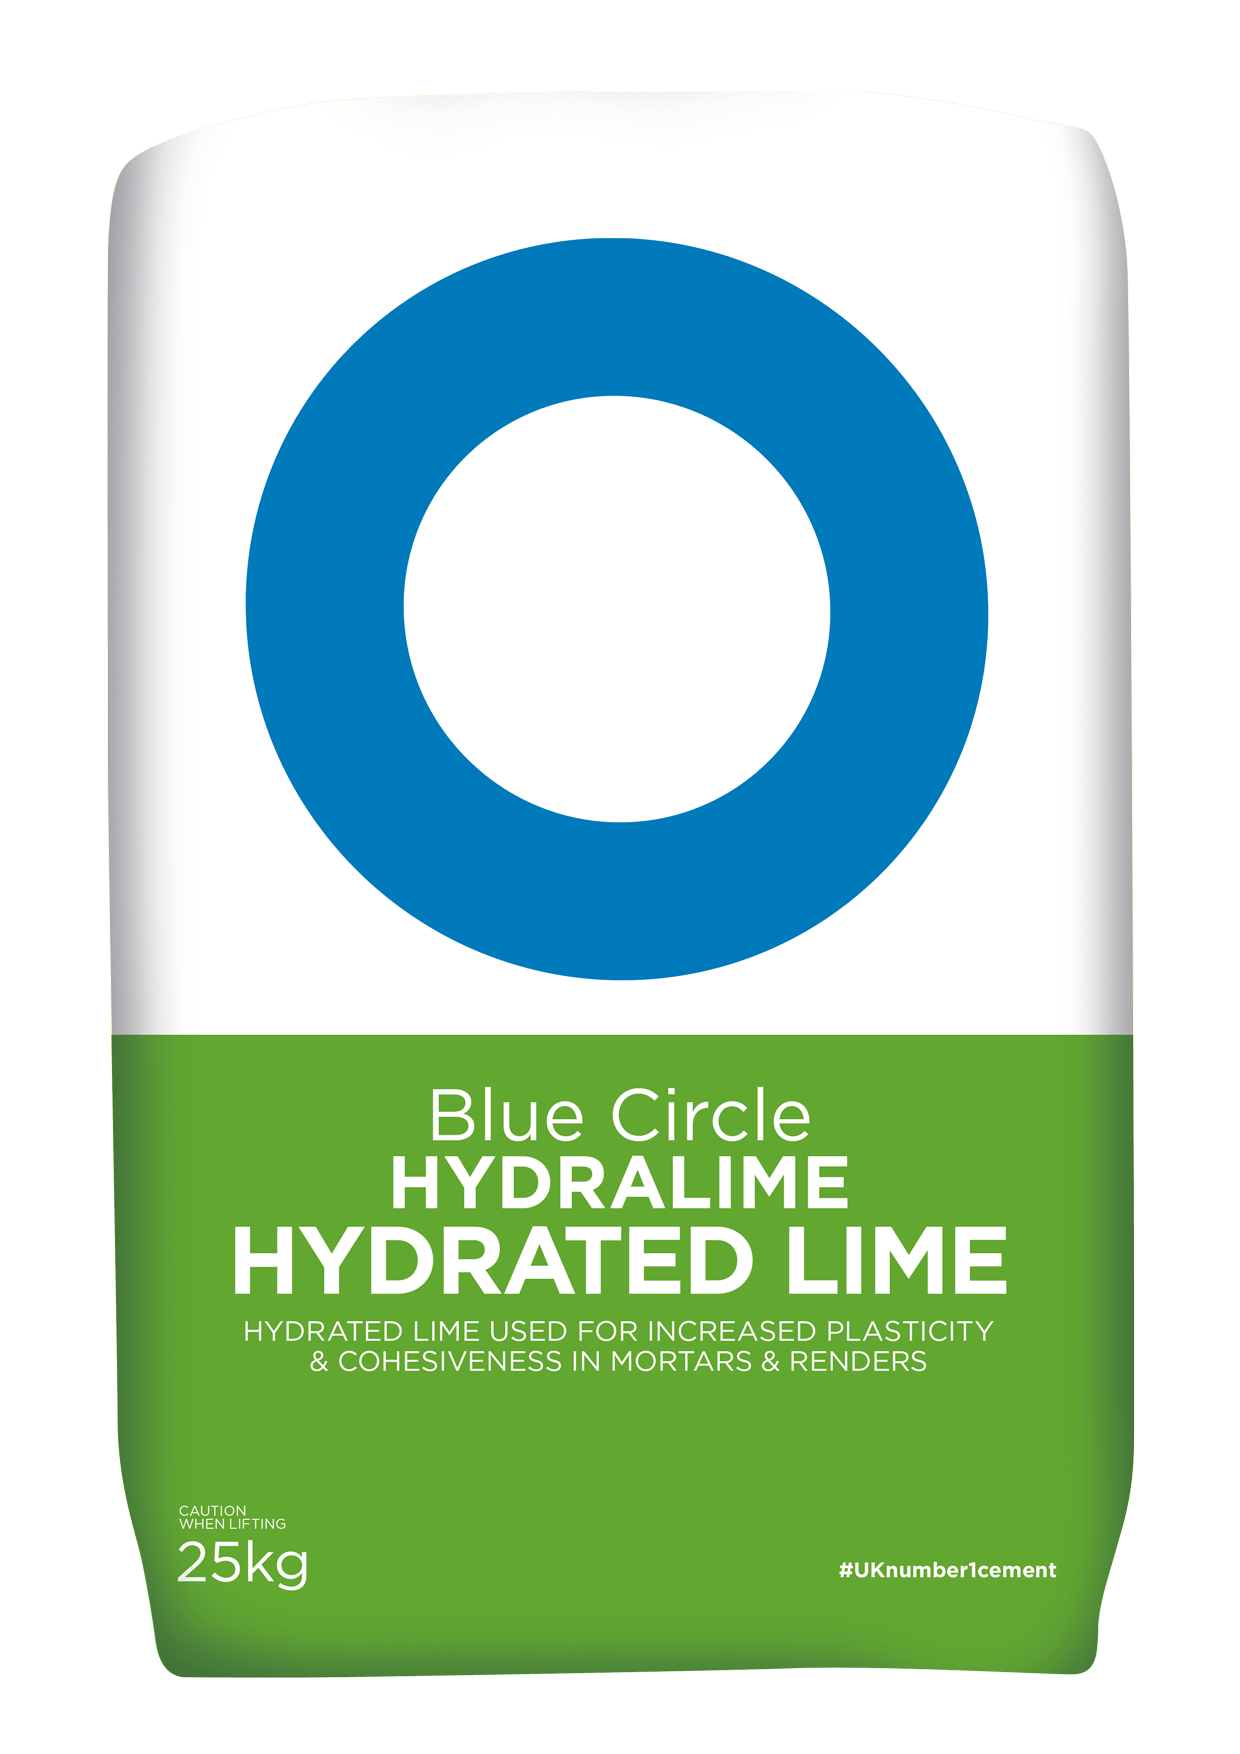 HYDRALIME - HYDRATED LIME